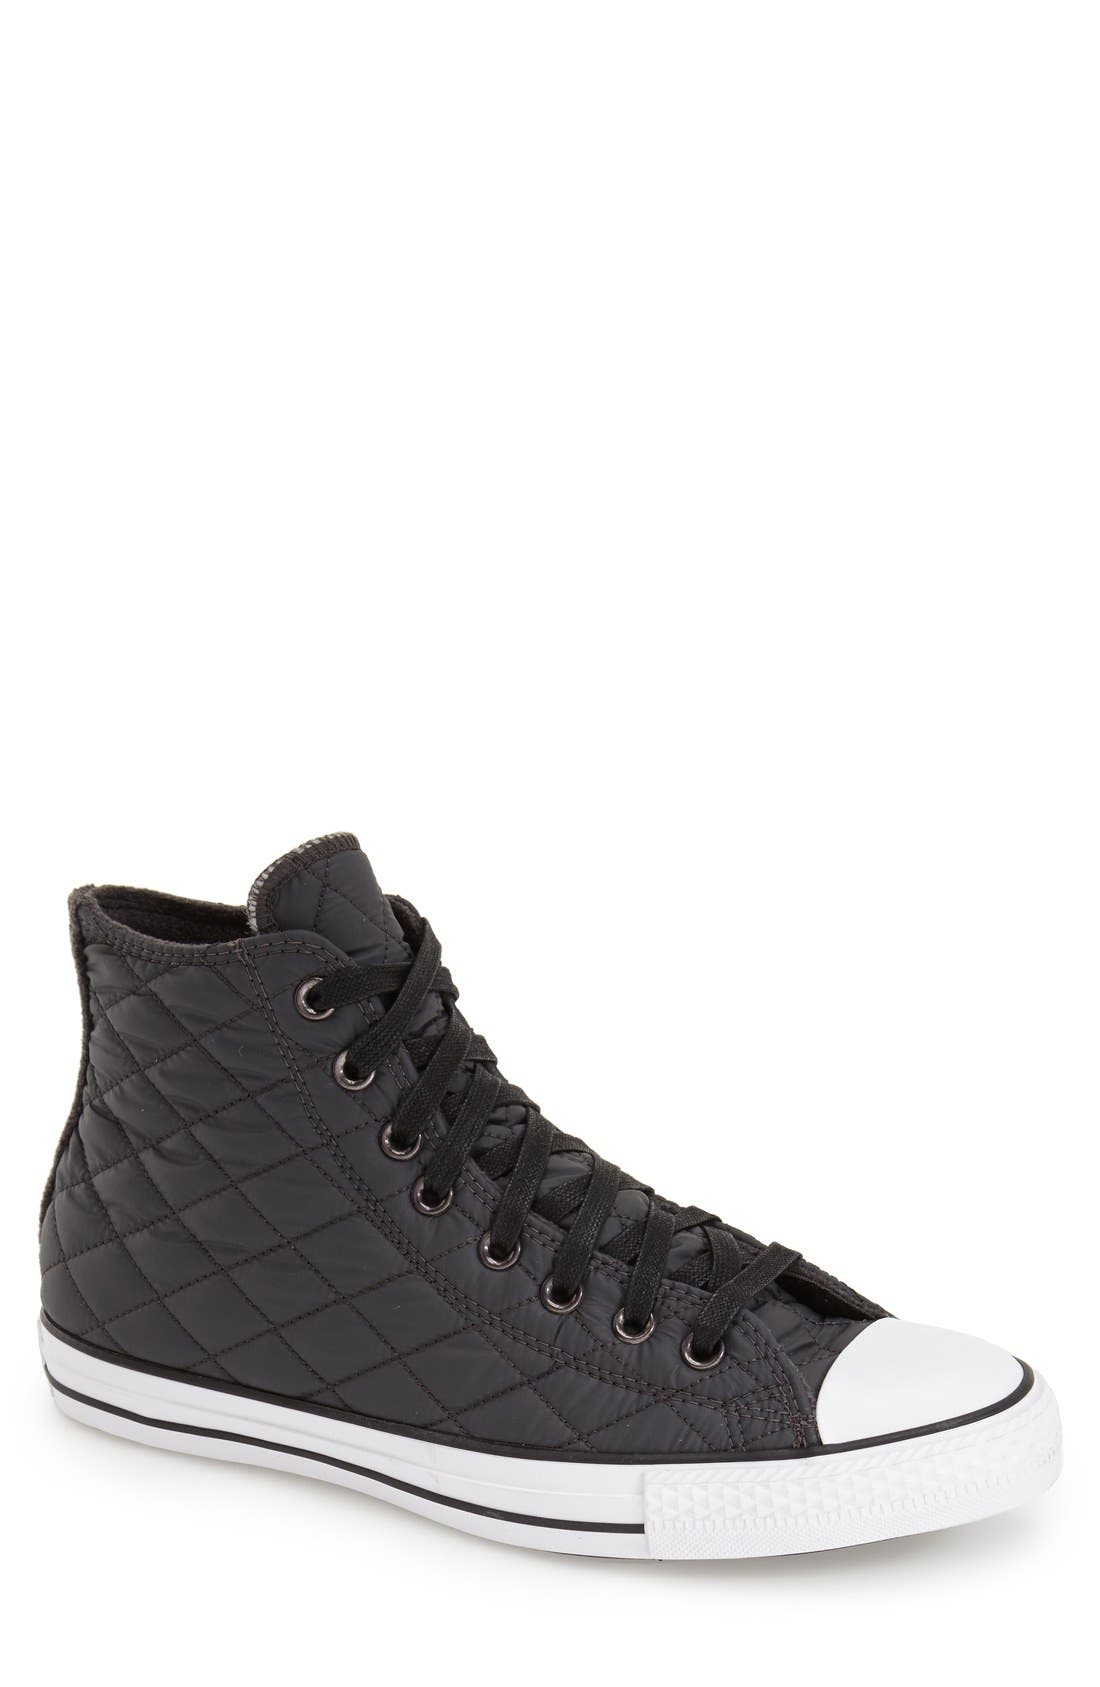 converse quilted high tops